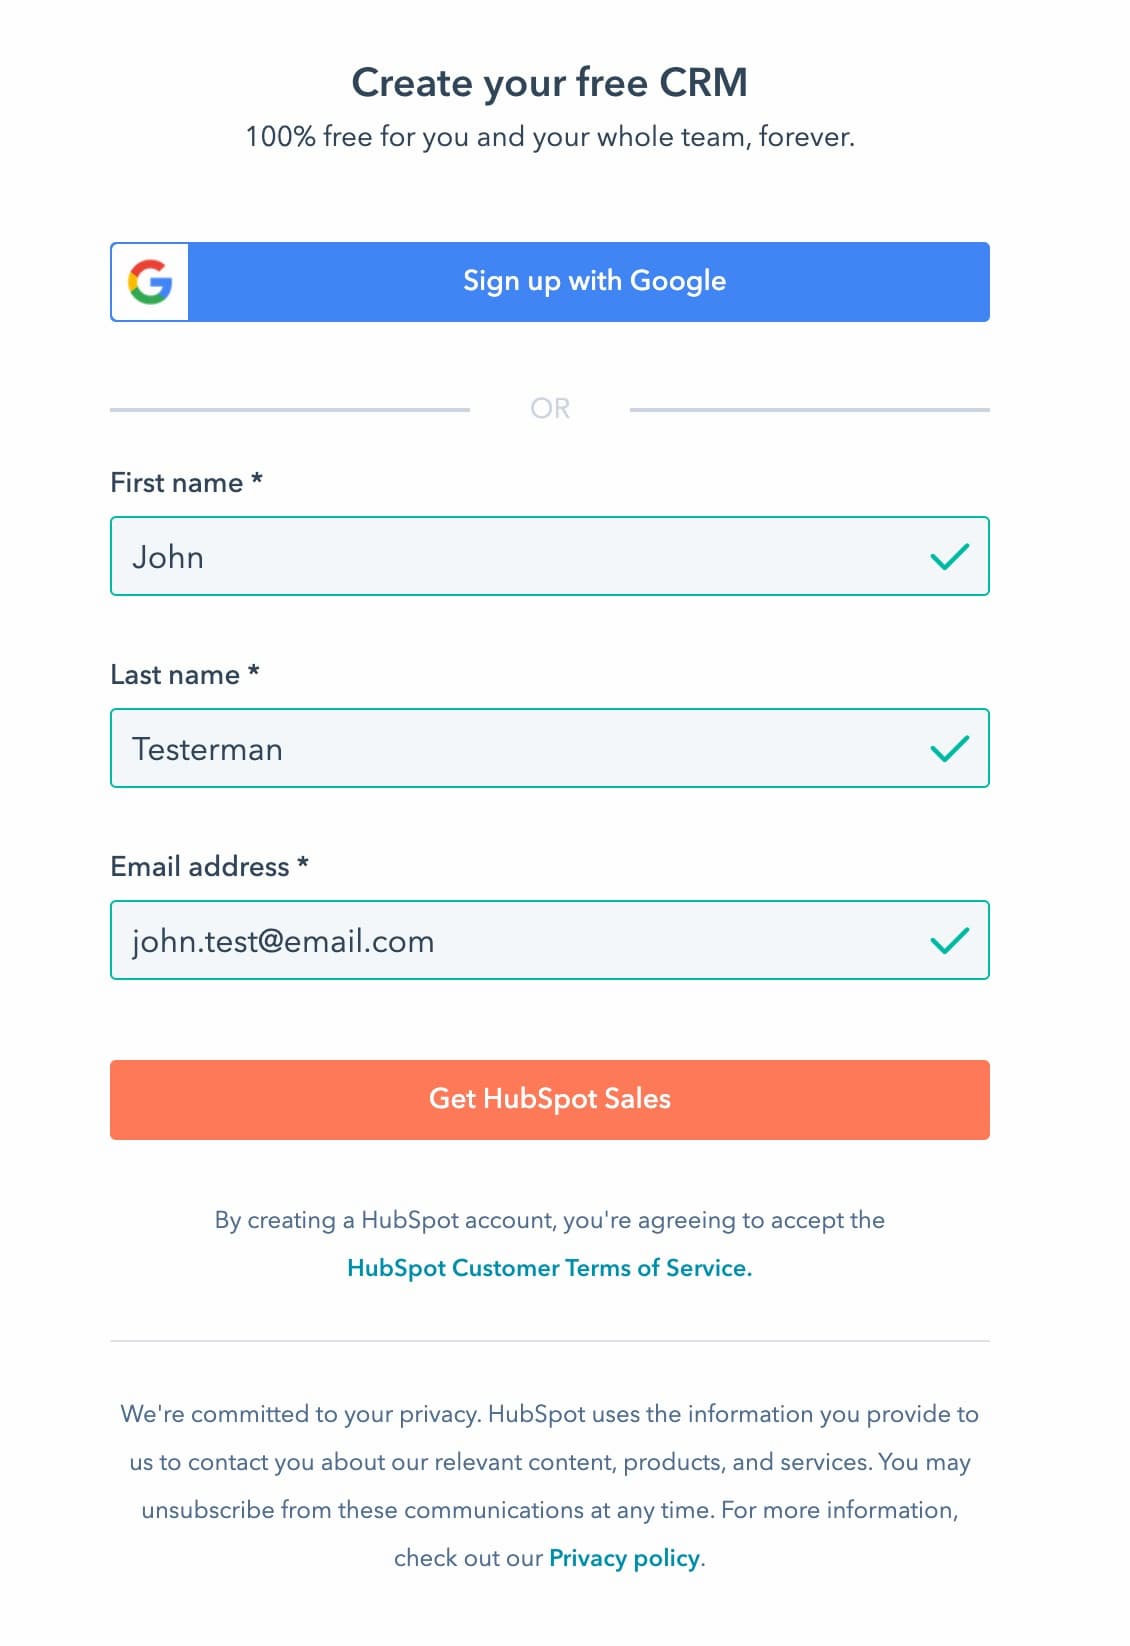 Hubspot is a good example of using feedback to show when fields are filled out correctly